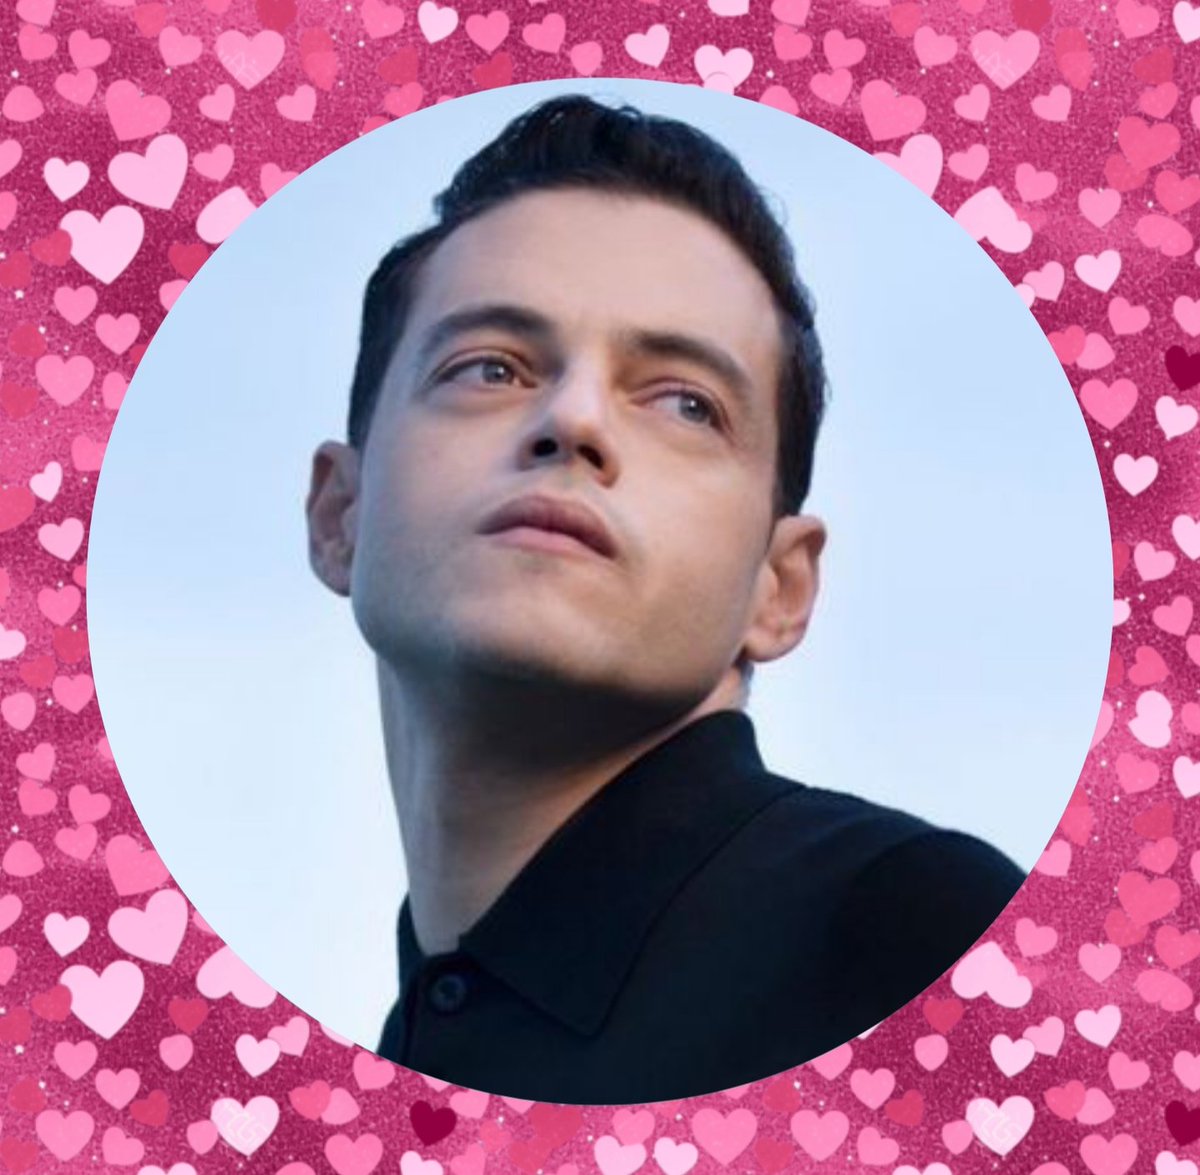 I just realised he's a mothers day birthday baby 💞

Rami's birthday May 12 💕
Mother's day May 12 💗

Him and Sami born on  #MothersDay 🩷

#RamiMalek and #SamiMalek 💖